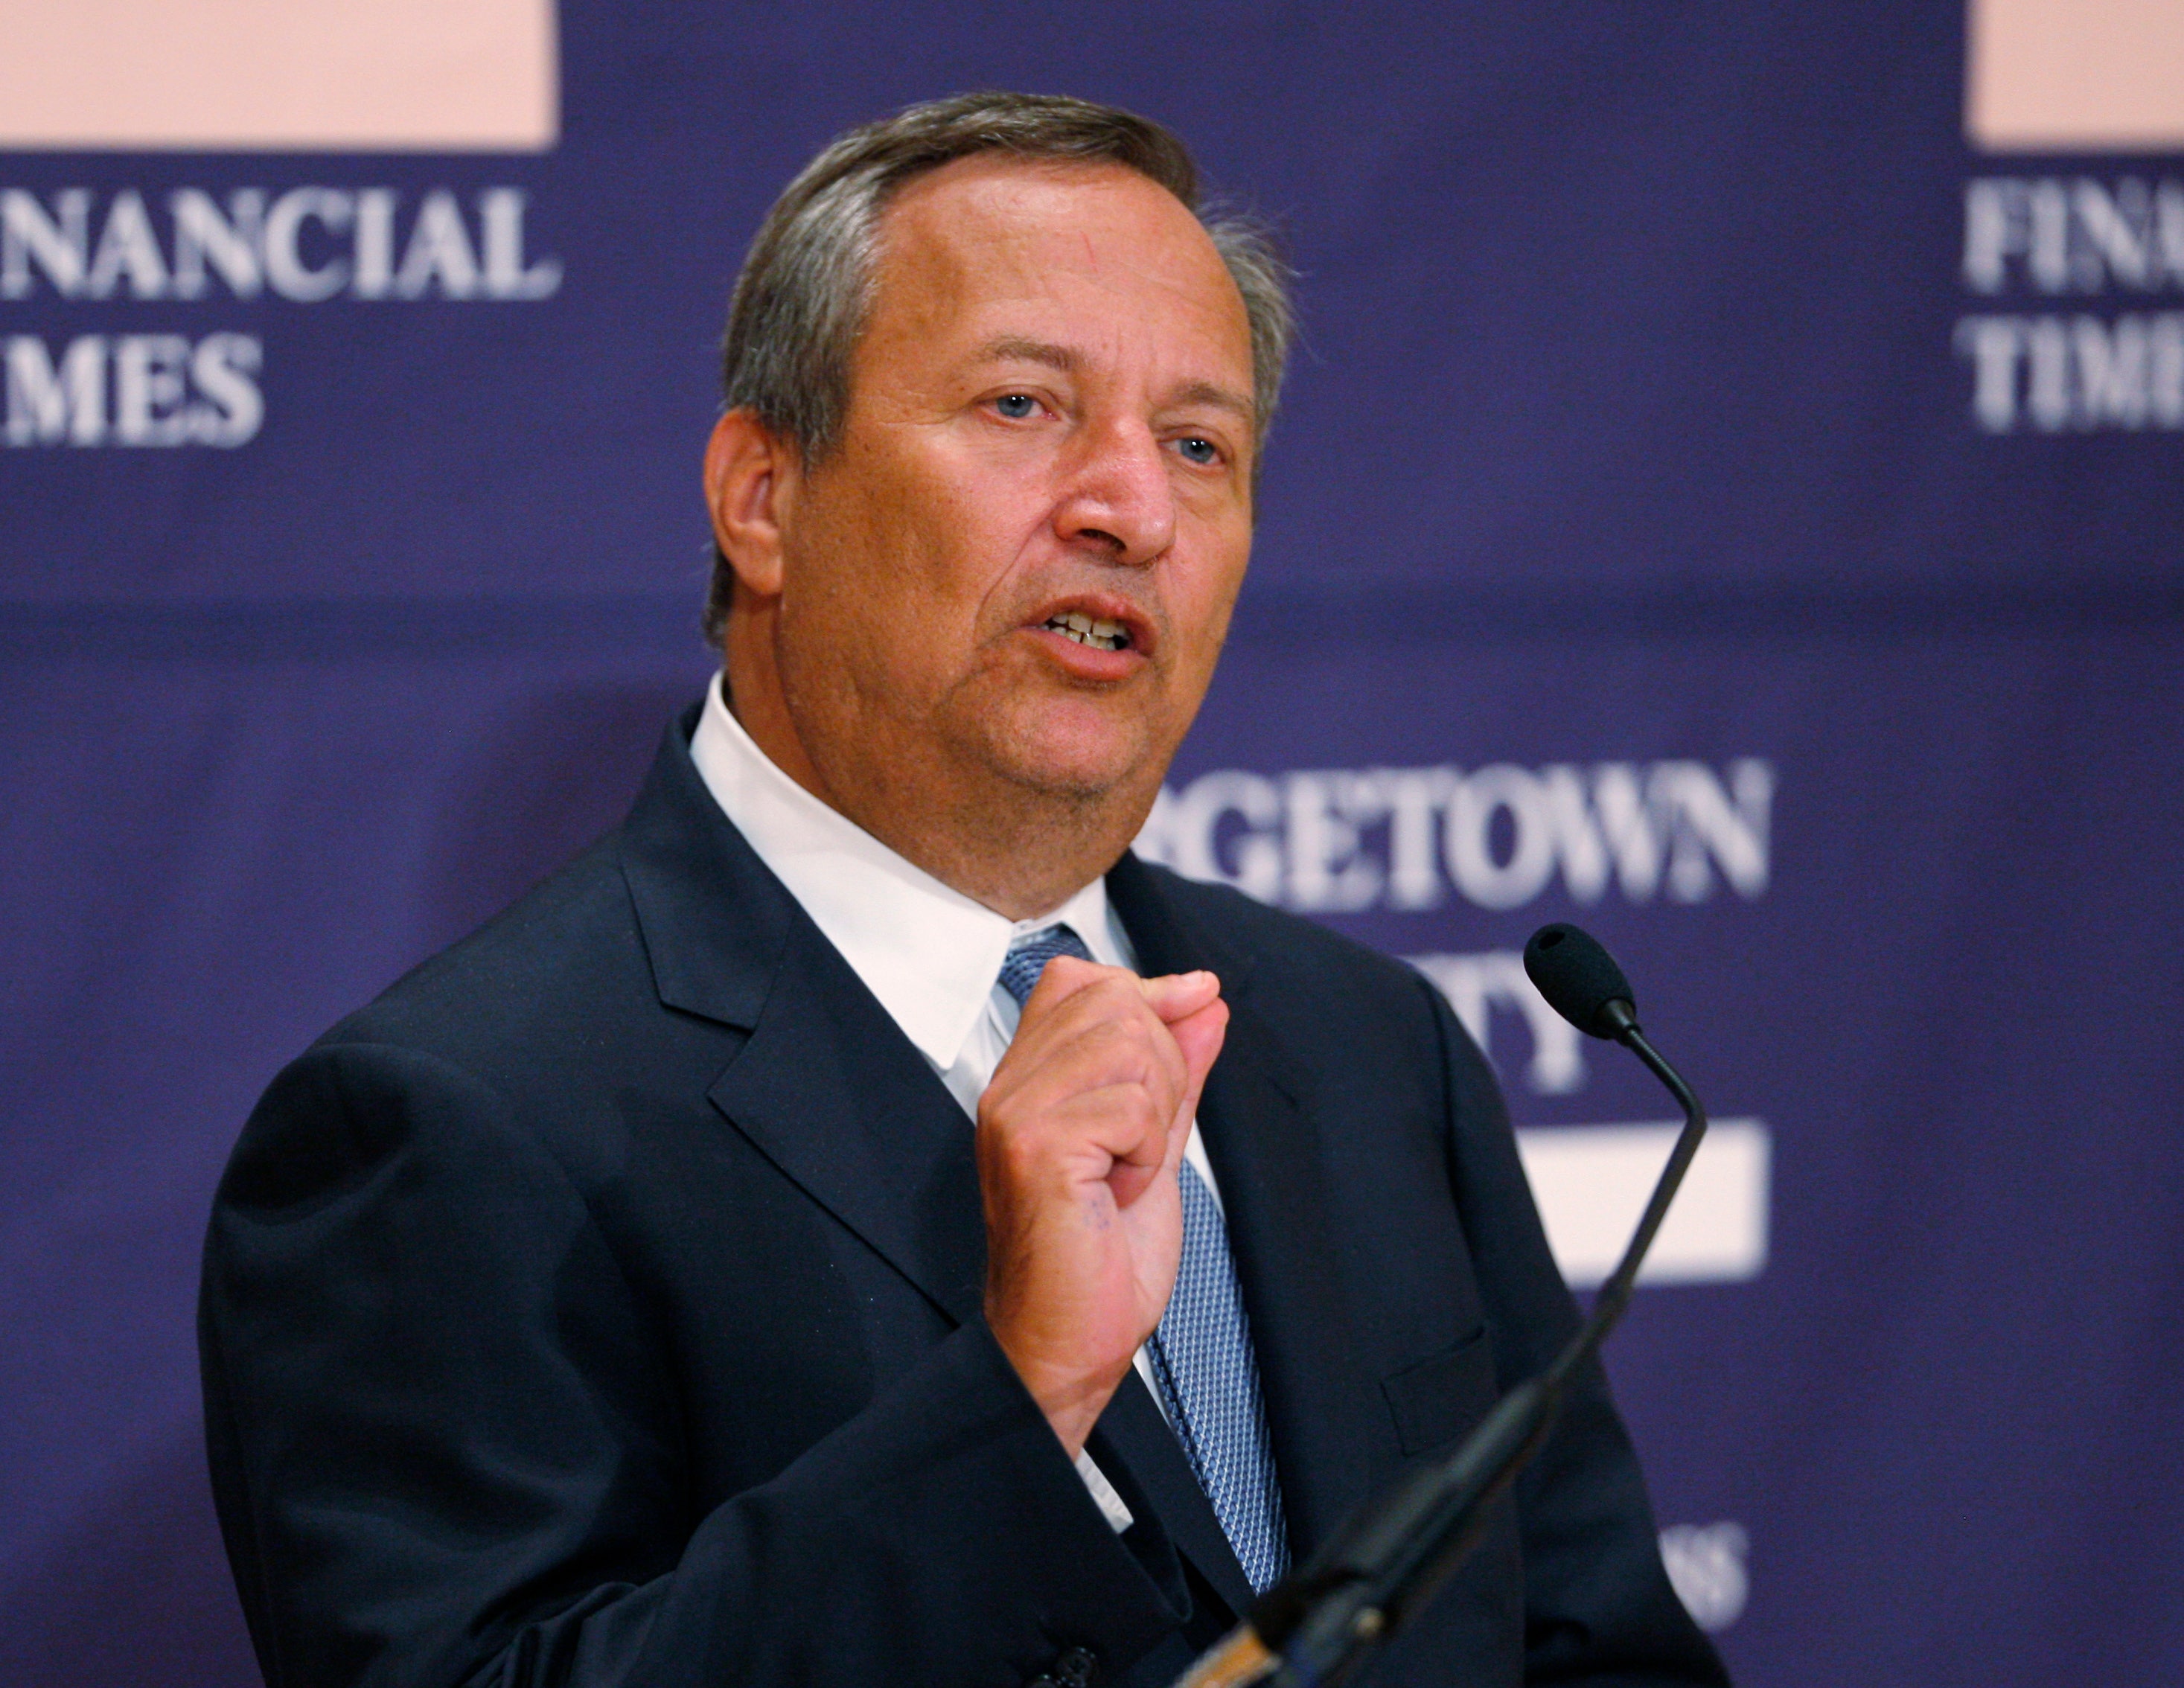 Larry Summers says 'more likely than not' there will be a recession within 18 months